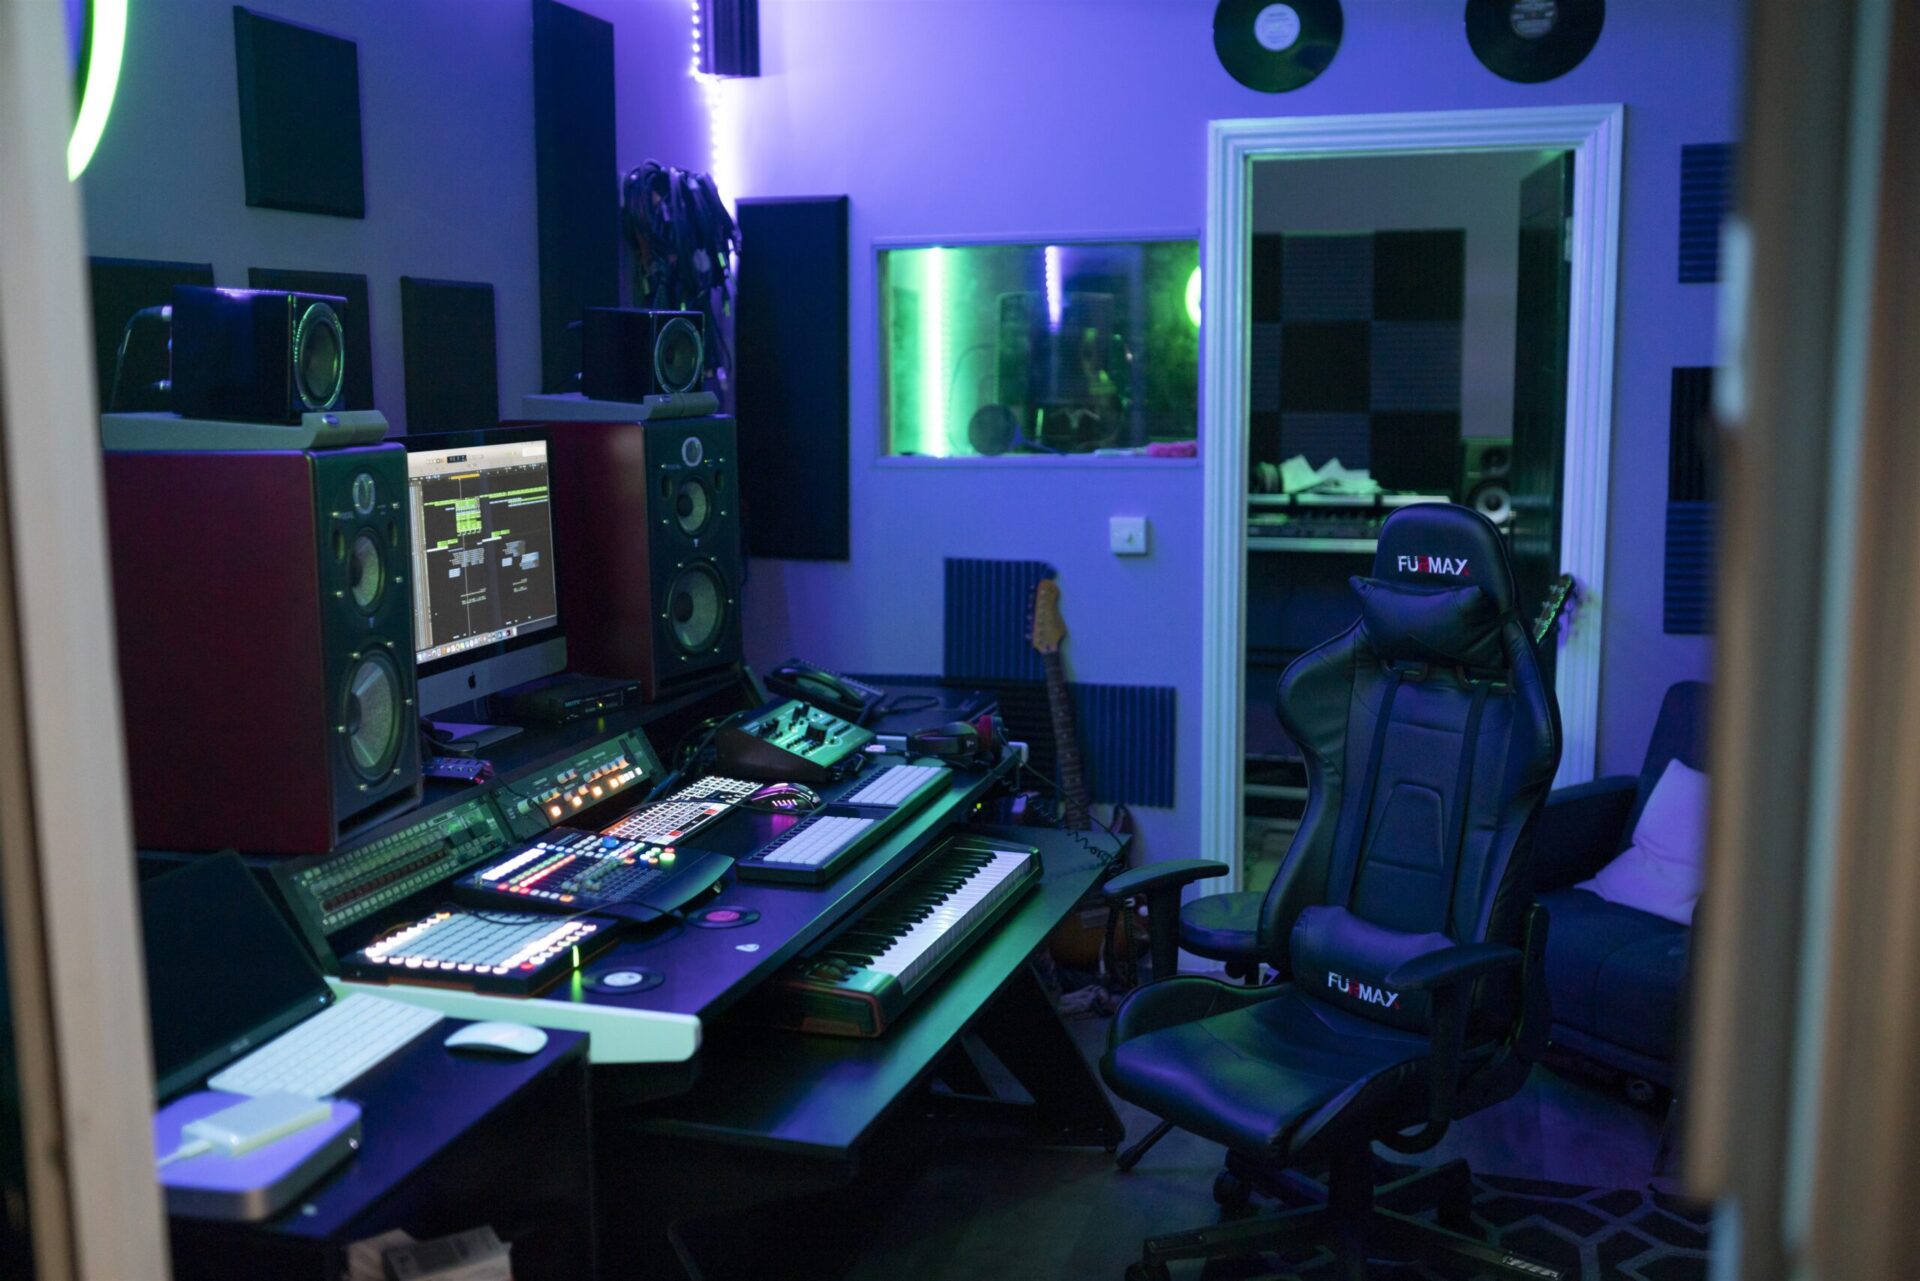 A recording studio with a computer desk and lighting.